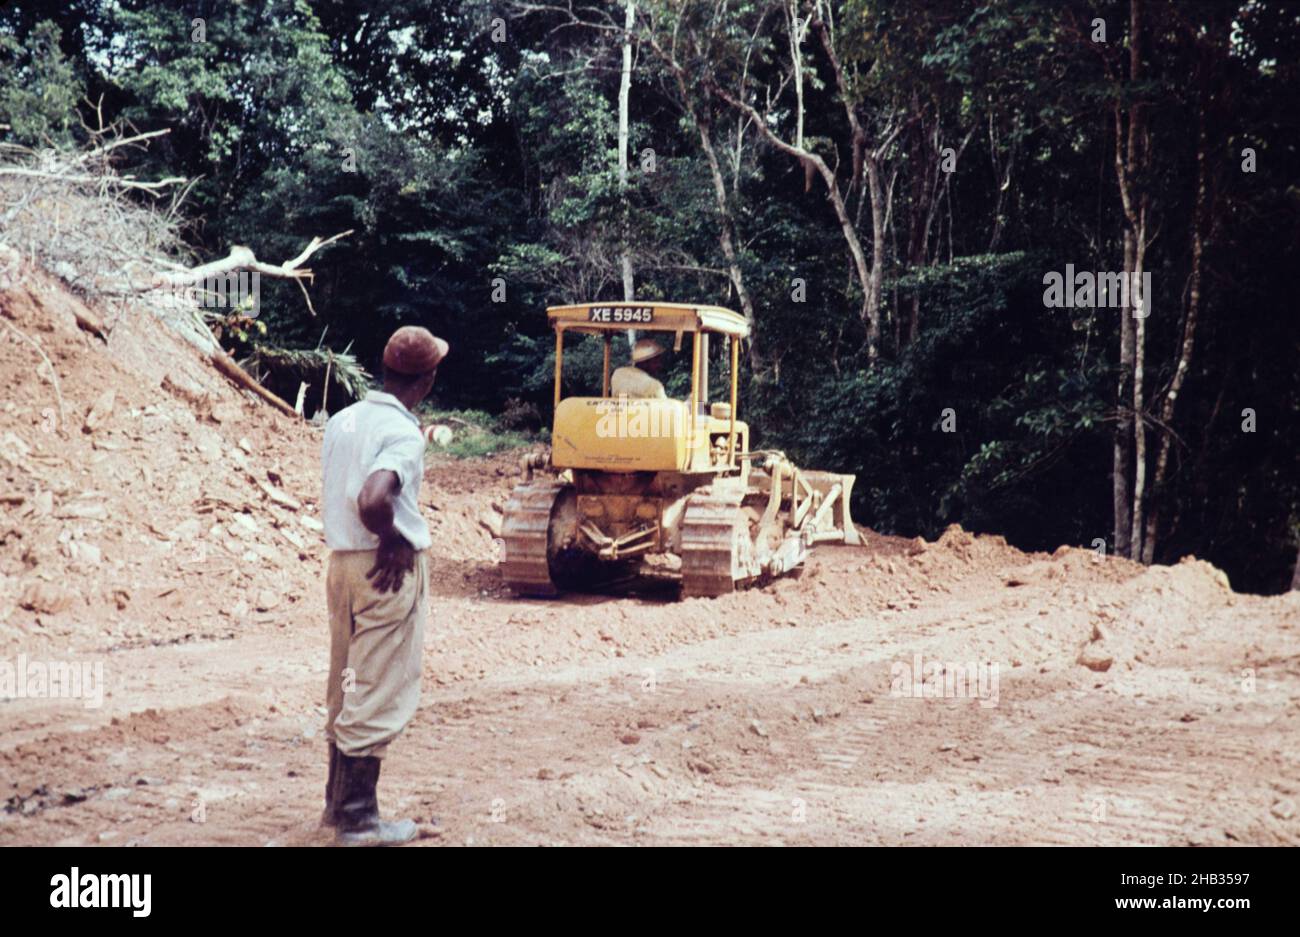 Caterpillar bulldozer repairing the road through rainforest blocked by landslide to Blanchisseuse, Trinidad early 1960s Stock Photo